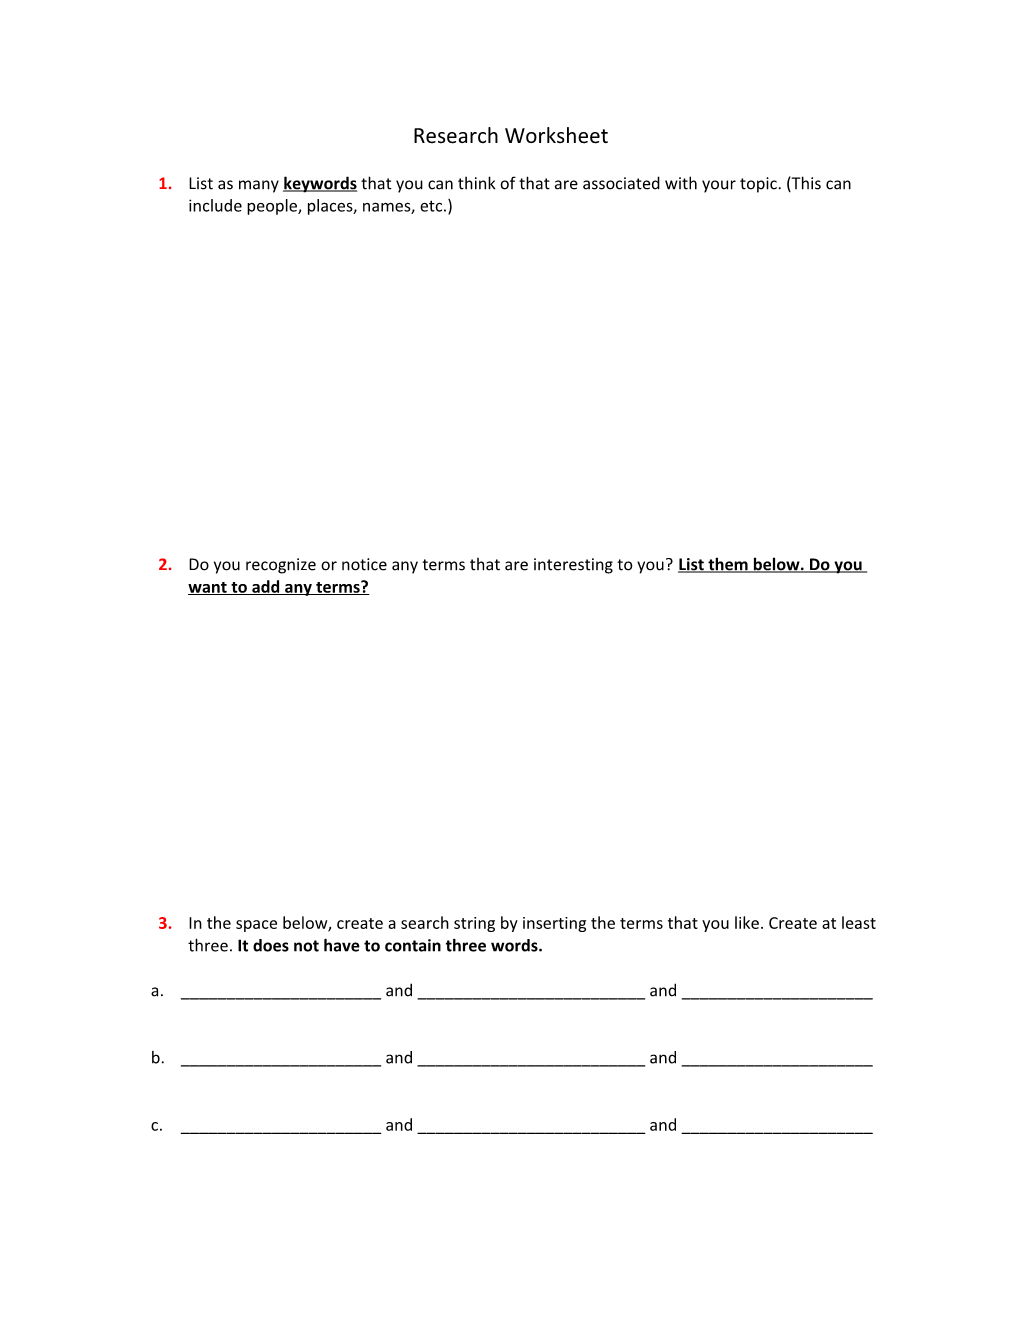 Research Worksheet